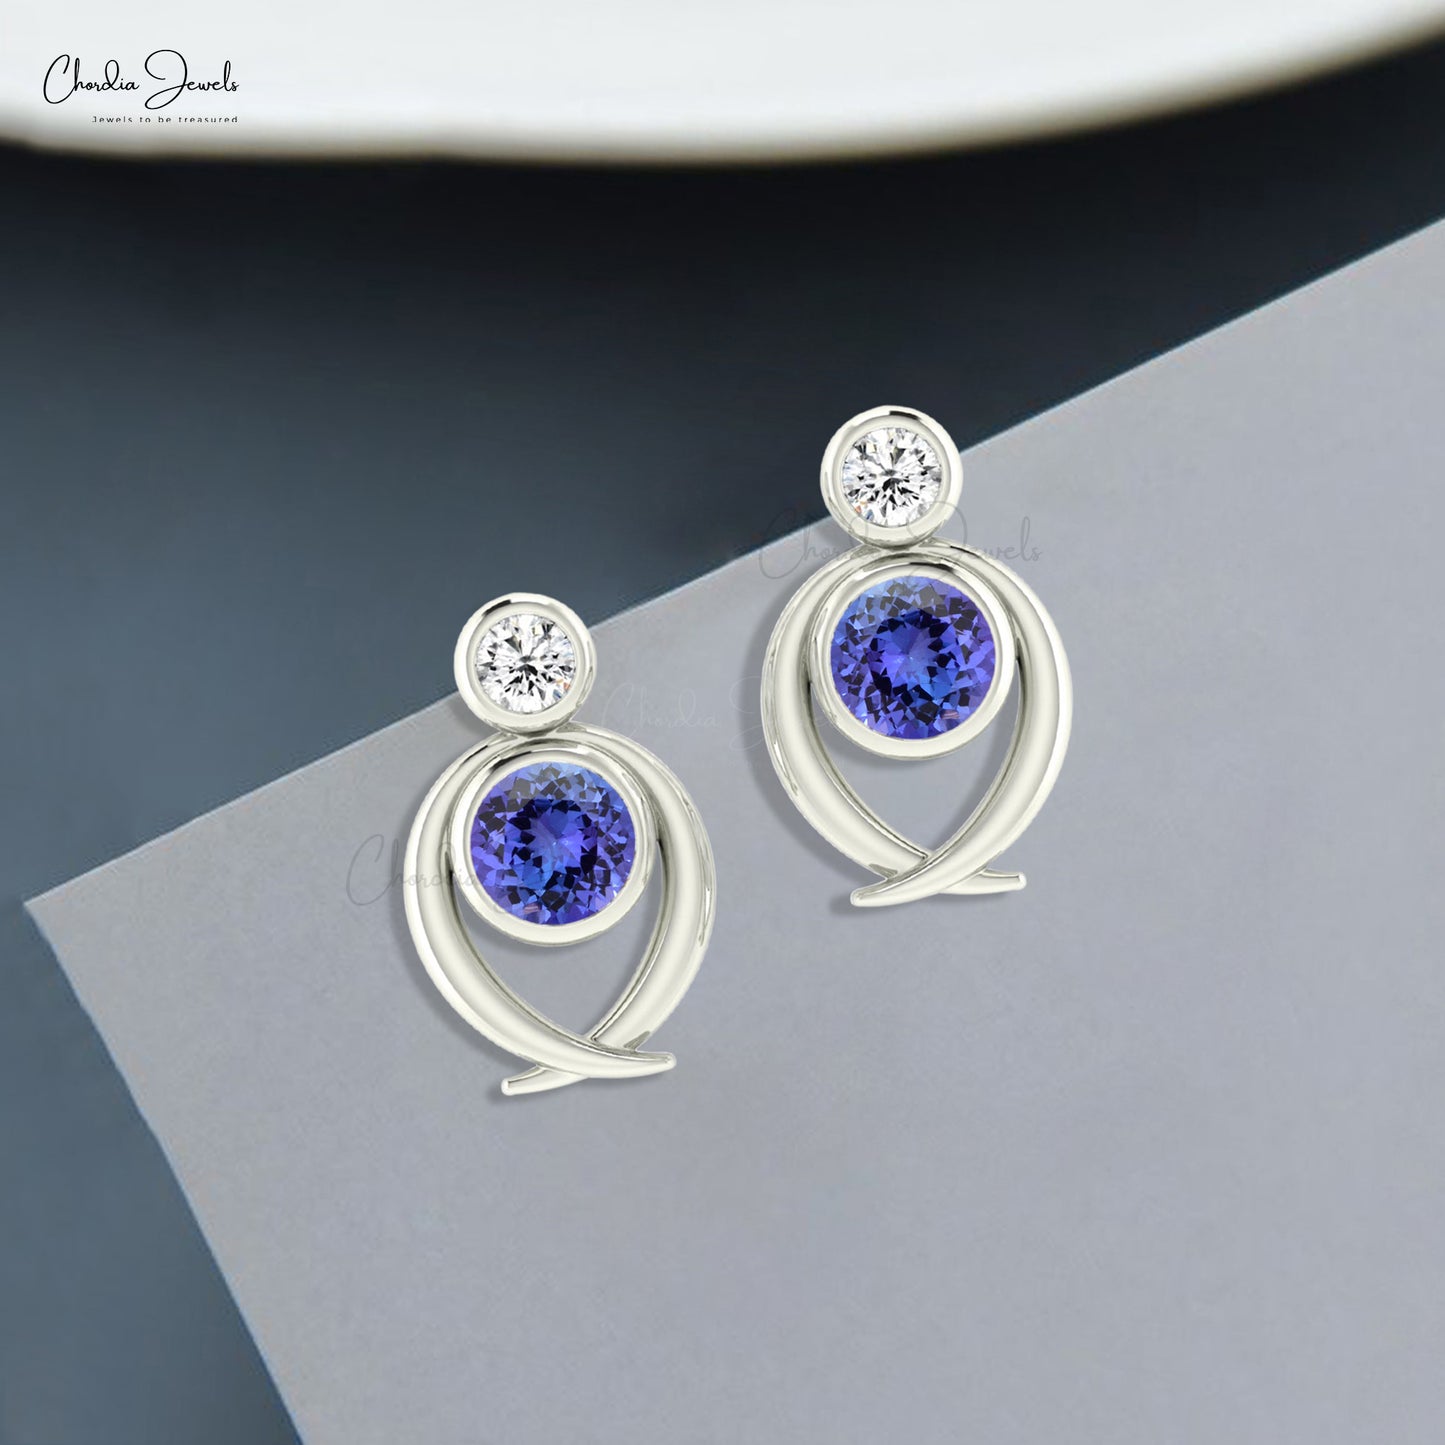 Round 5mm Cut Authentic Tanzanite 2-Stone Stud Earrings With Push Back 14k Solid Gold Bezel Set White Diamond Studs Fine Jewelry For Gift